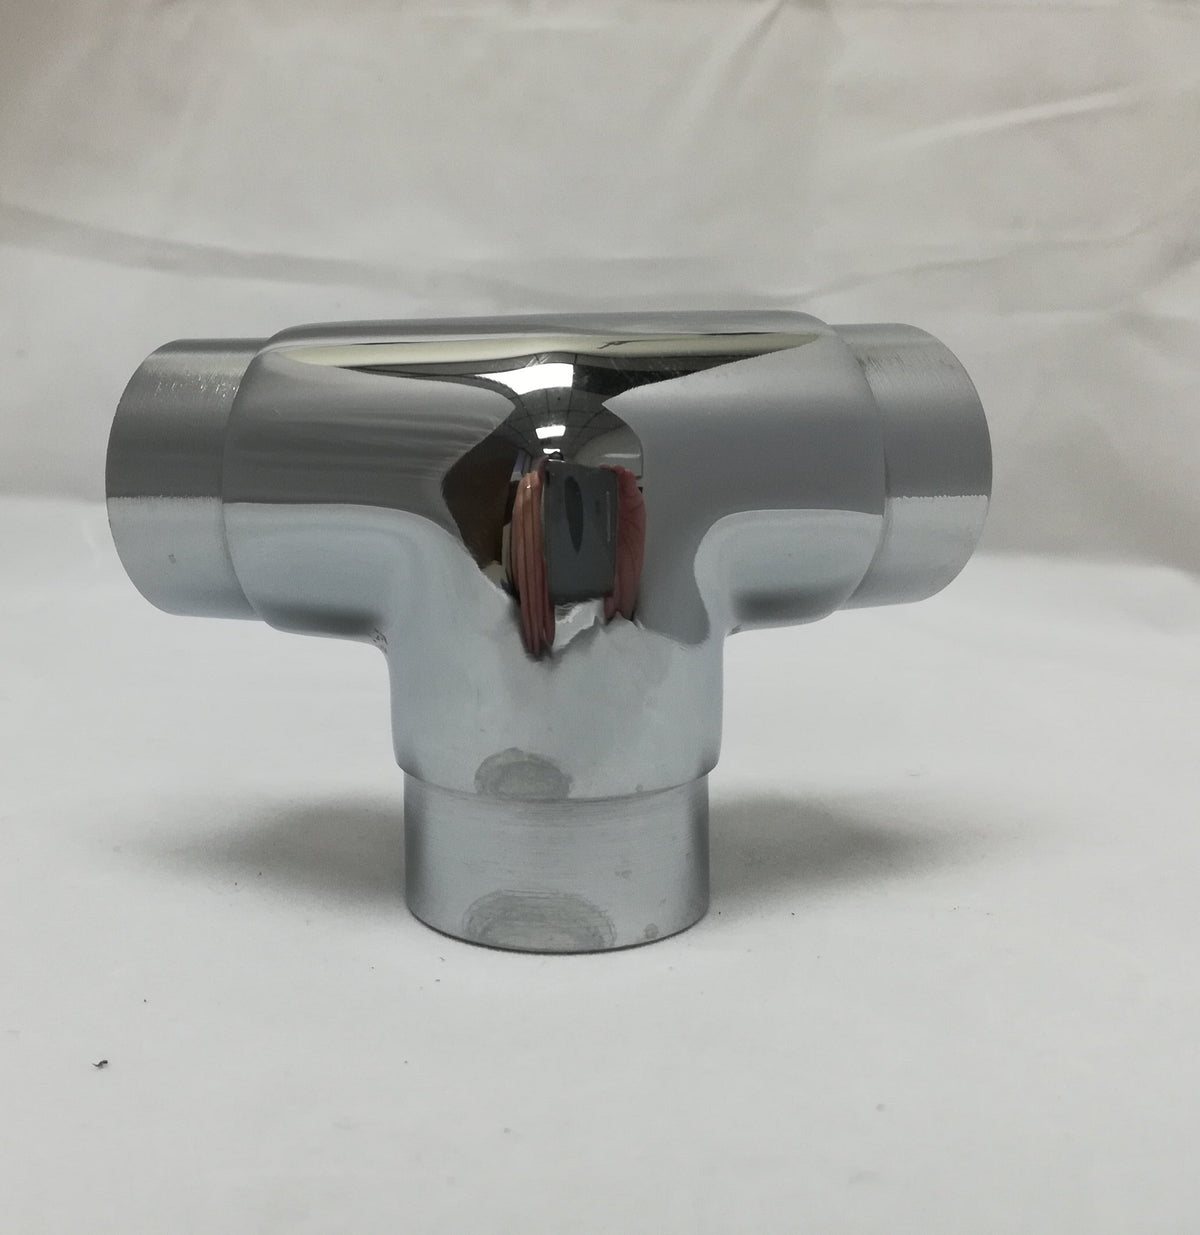 Flush 135° Side Outlet Elbow for 2" Tubing - Trade Diversified